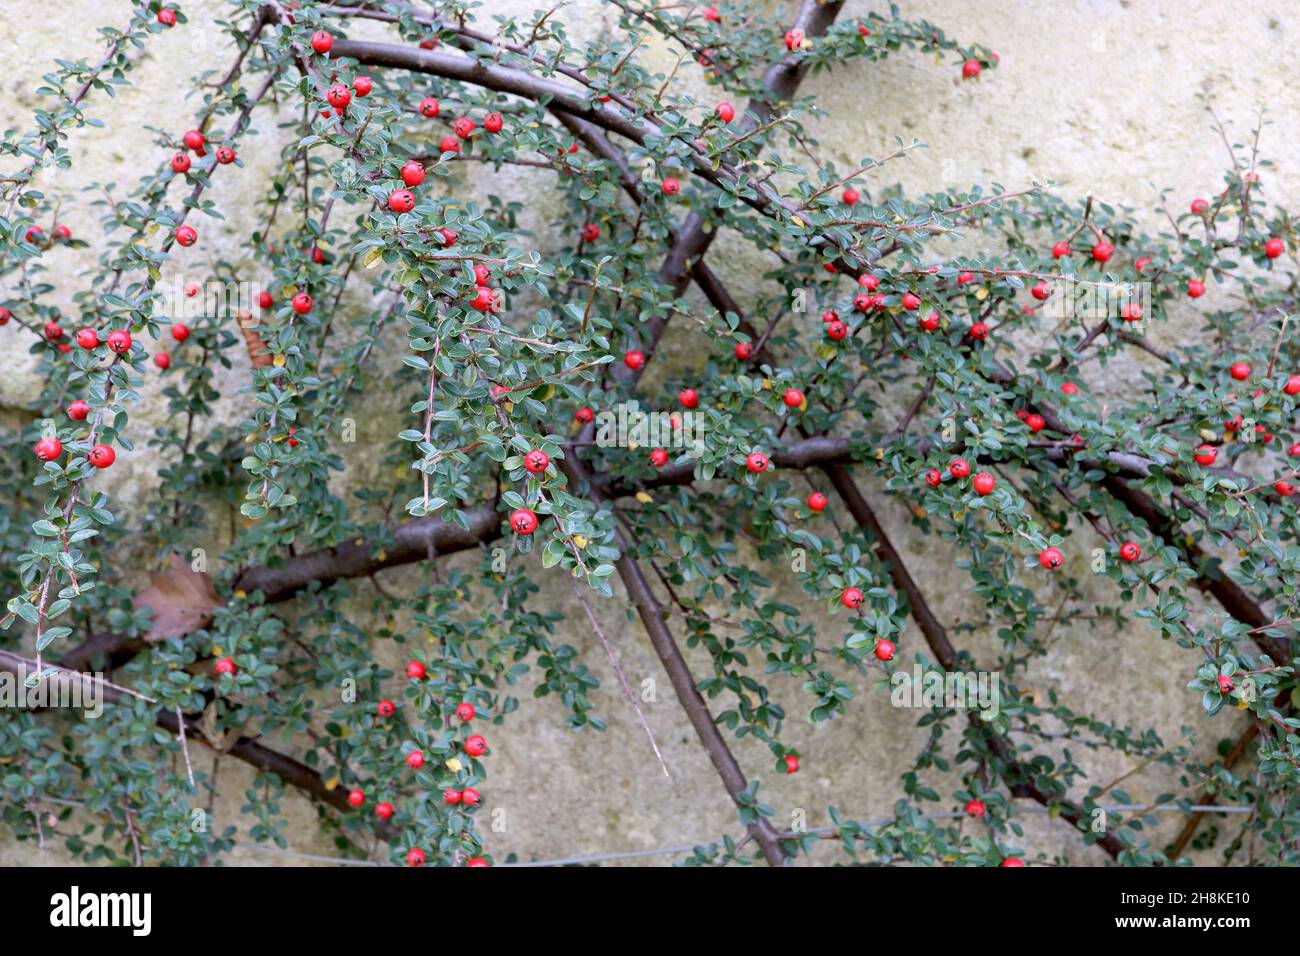 Cotoneaster marginatus fringed cotoneaster – round red berries and tiny glossy dark green leaves with white outline hairy margins,  November, England, Stock Photo